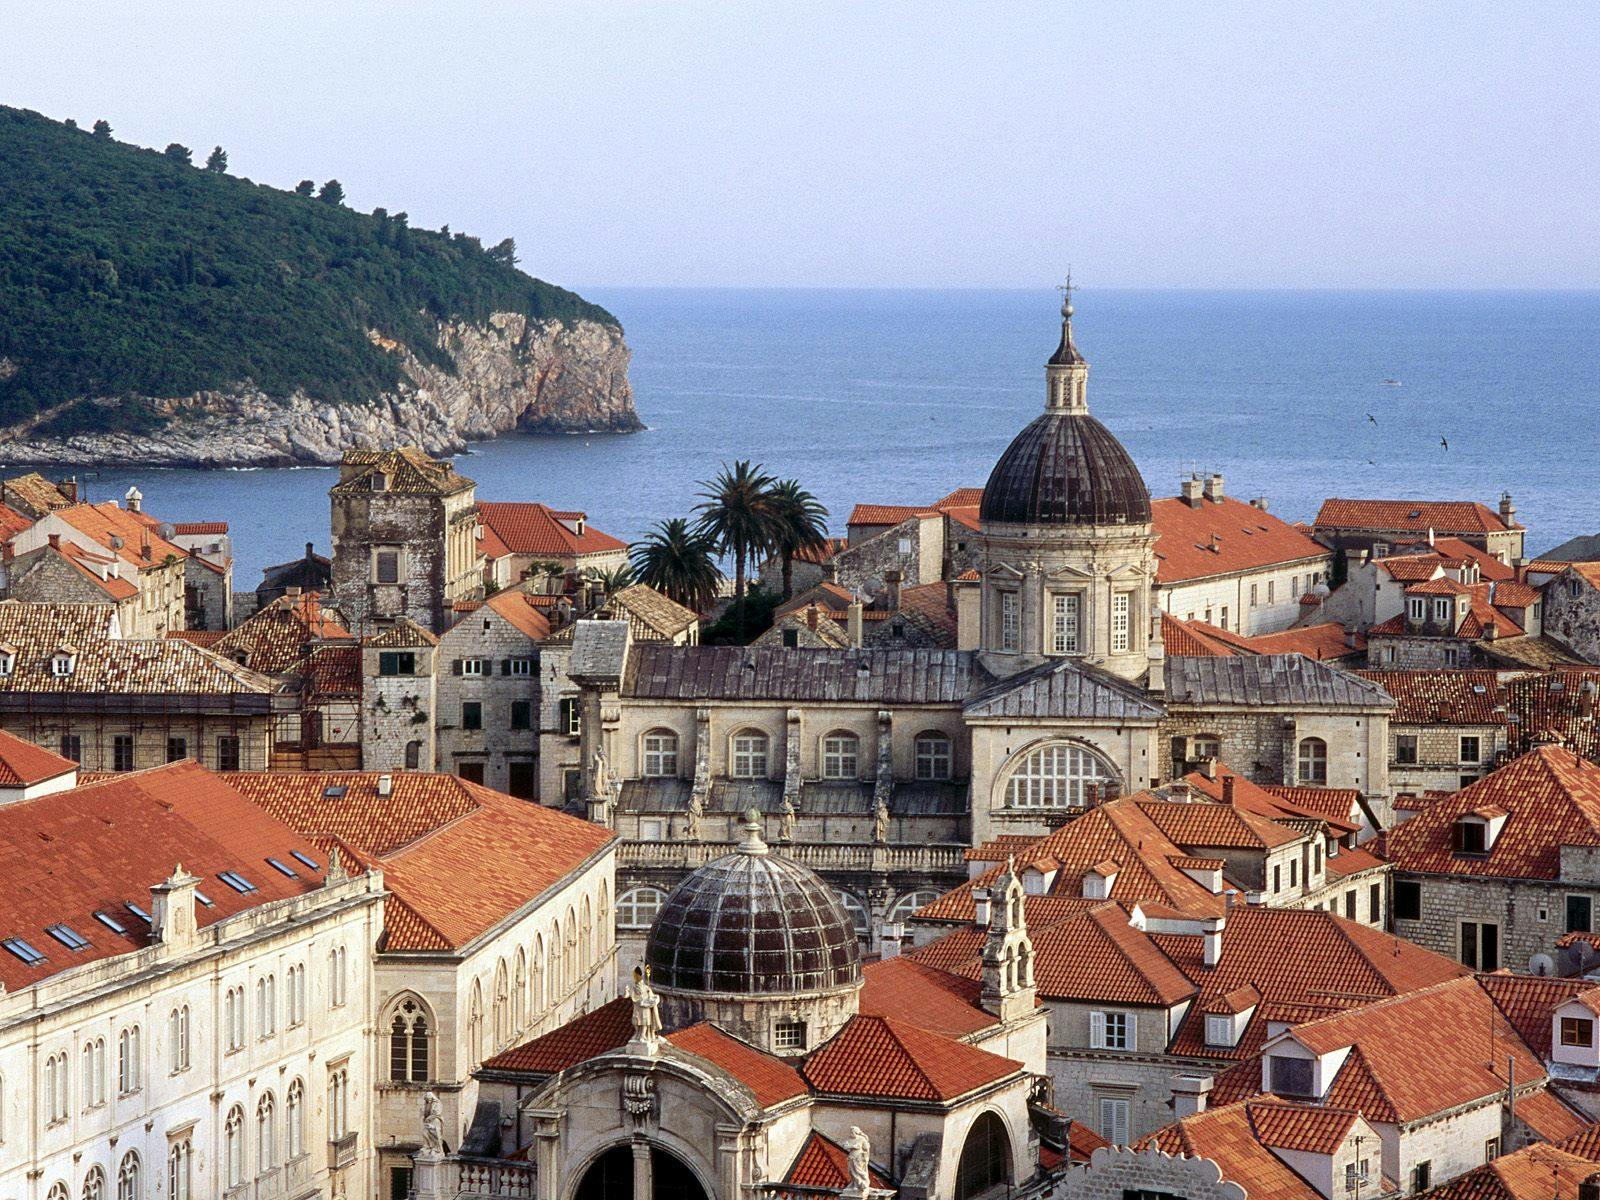 Private Dubrovnik city walls walking tour with entry tickets